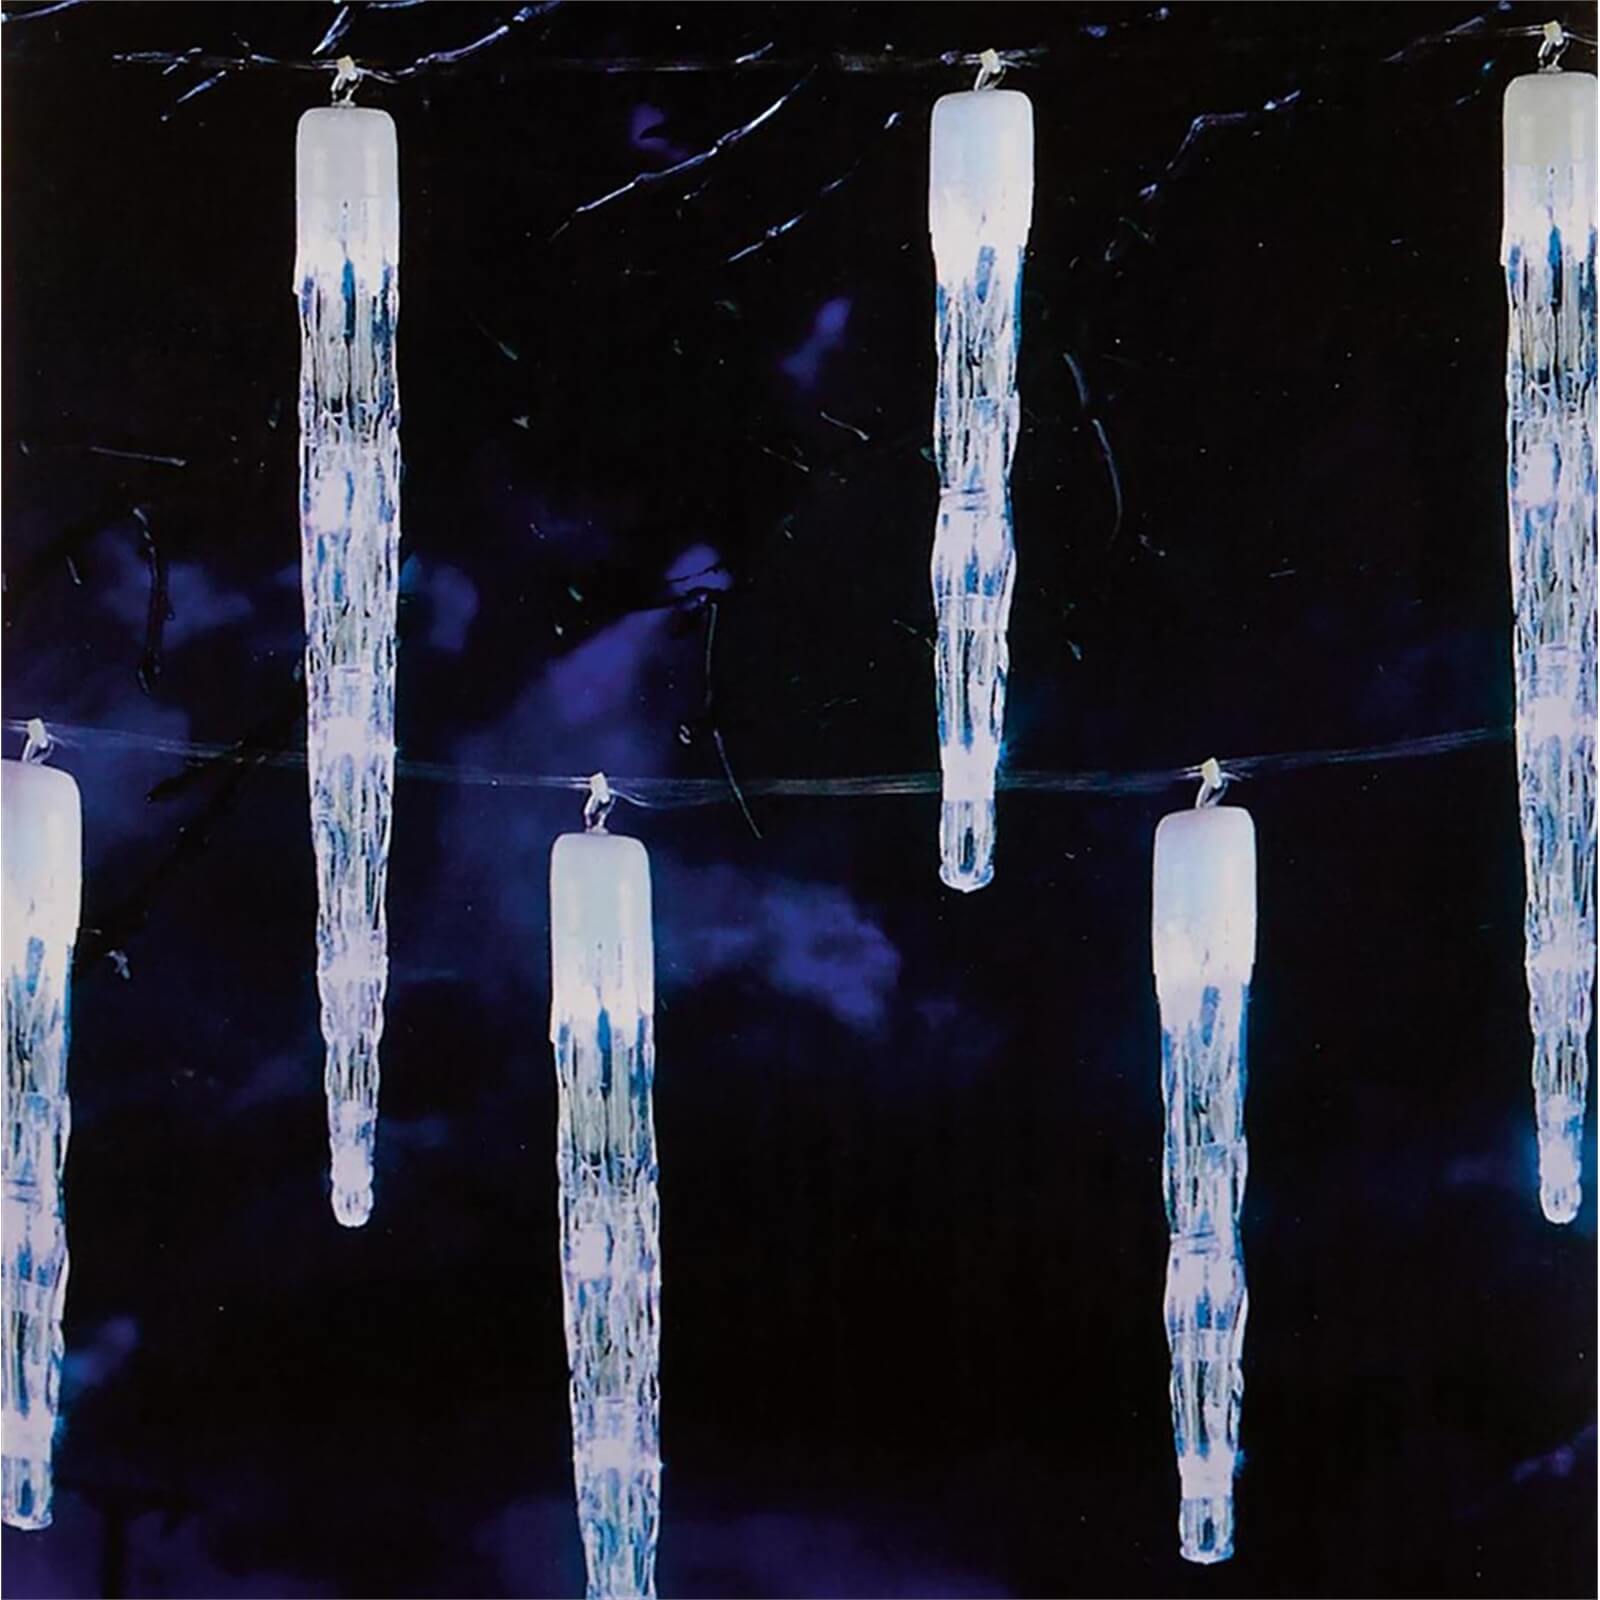 24 Chaser Icicle Lights With 72 Blue LEDs